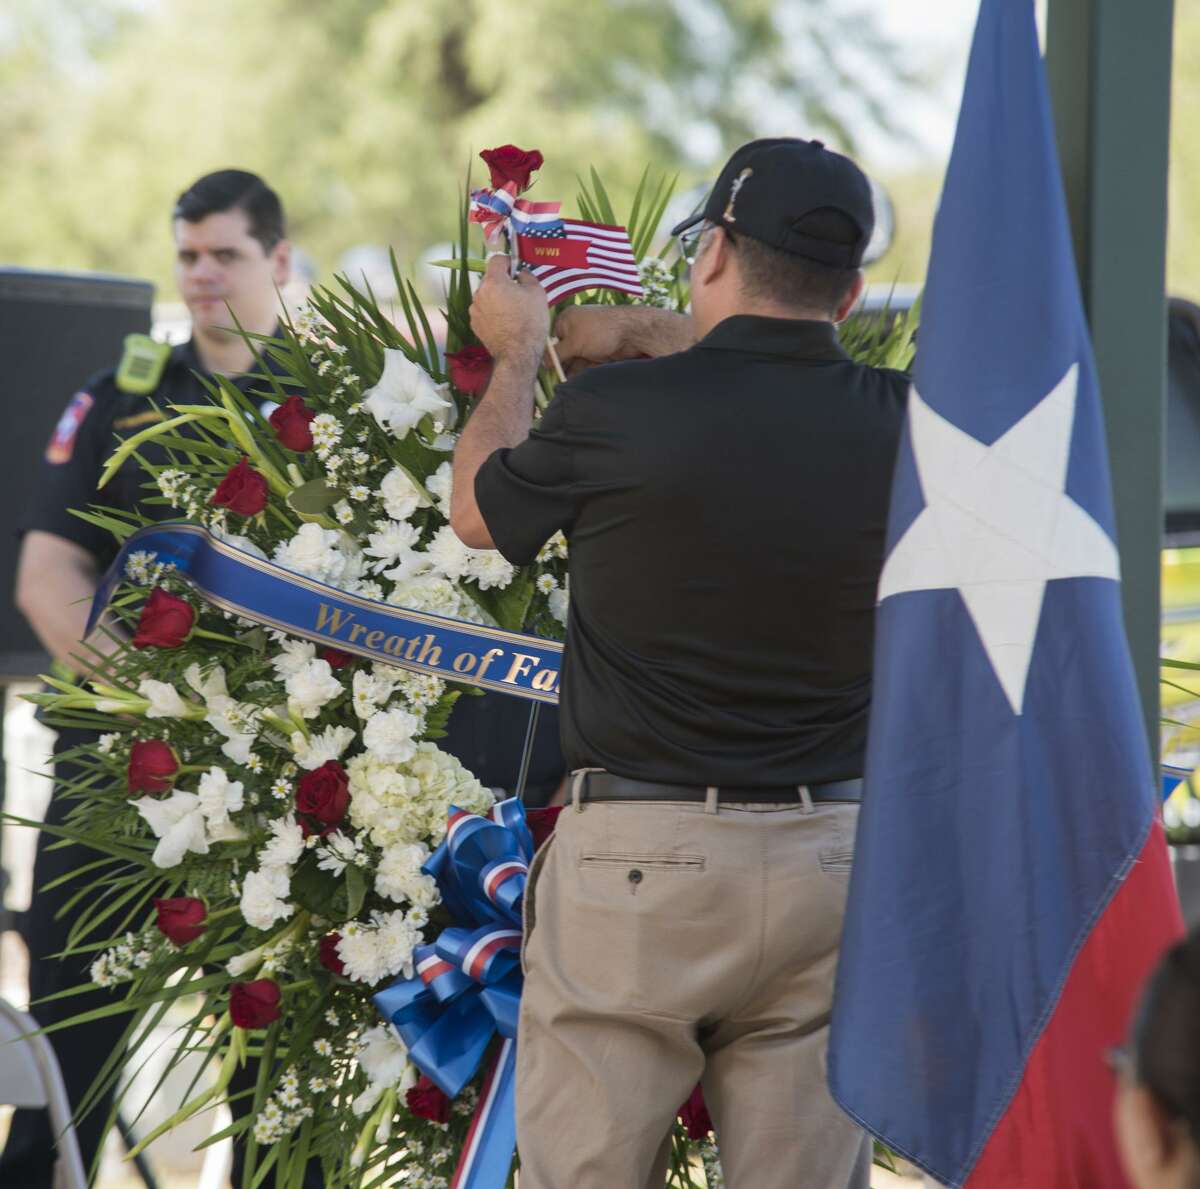 A wreath is placed to honor the fallen during a Memorial Day service at the Laredo City Cemetery on Monday. More than 200 names of local veterans were read.